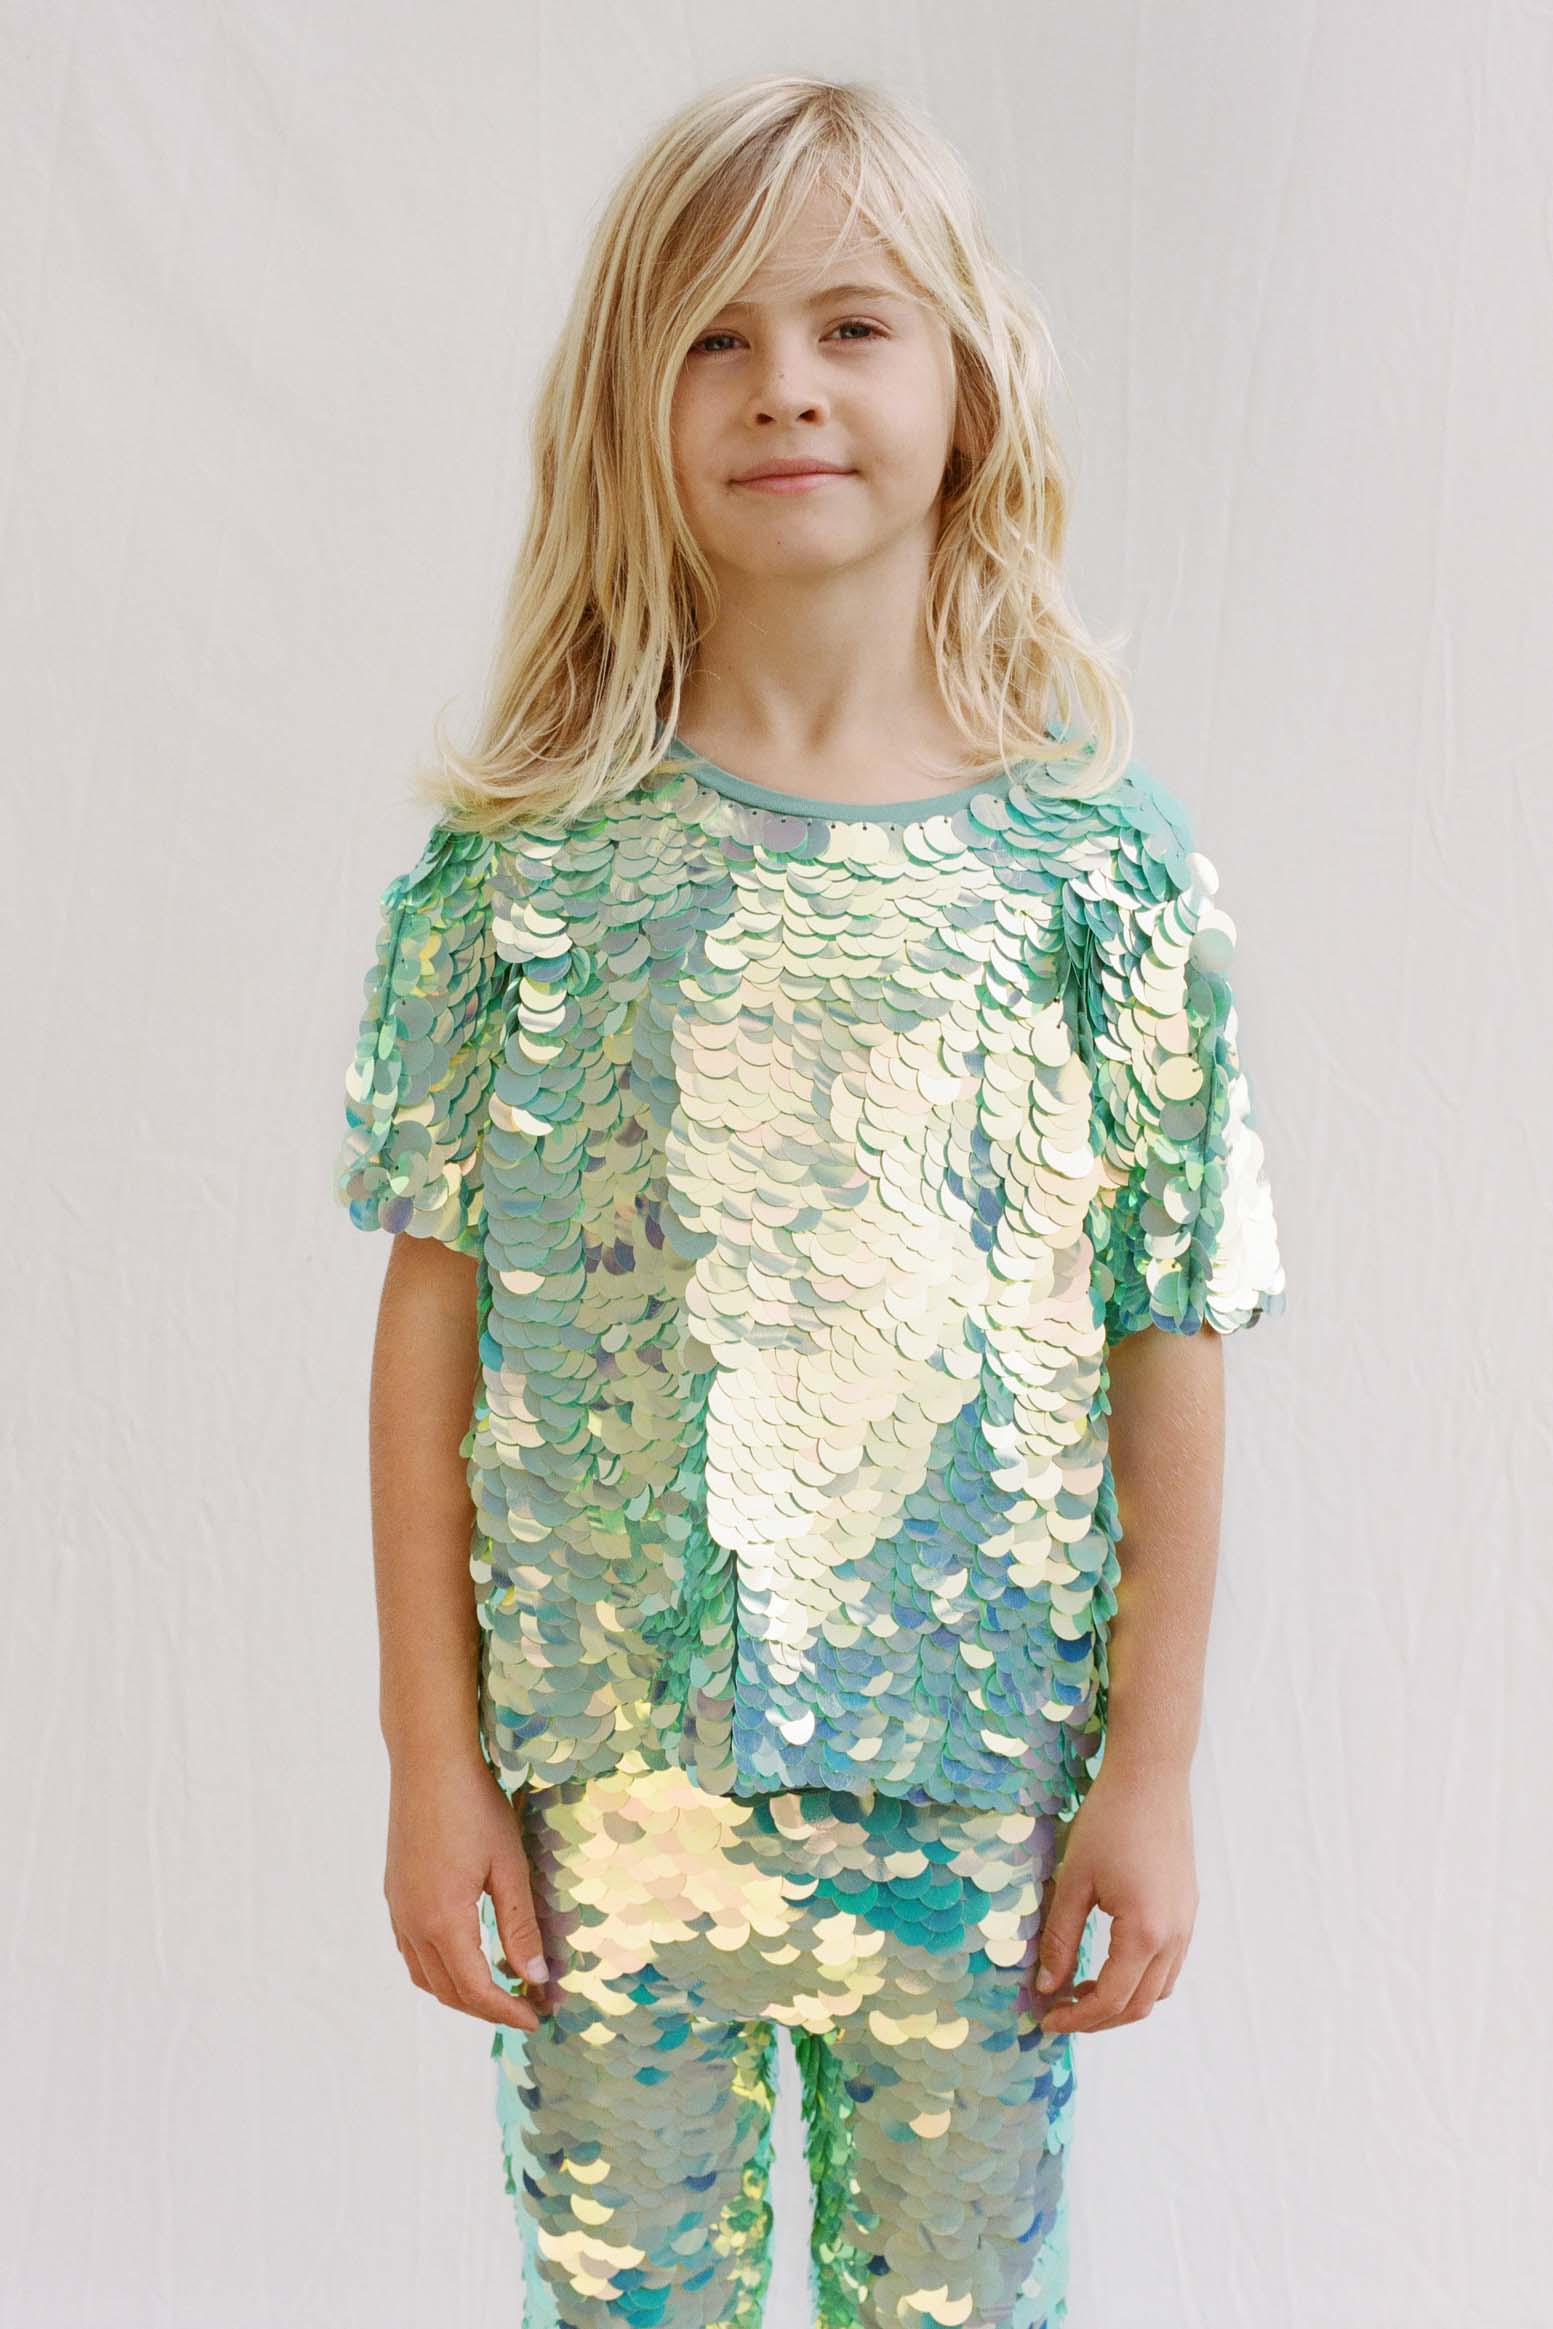 An image of a child in a brightly lit outdoor space, facing the camera. He is wearing Rosa Bloom chameleon mint green, shimmering sequin childrenswear. He wearing the chameleon Luna sequin leggings and matching sequin Sonny children’s t-shirt. 